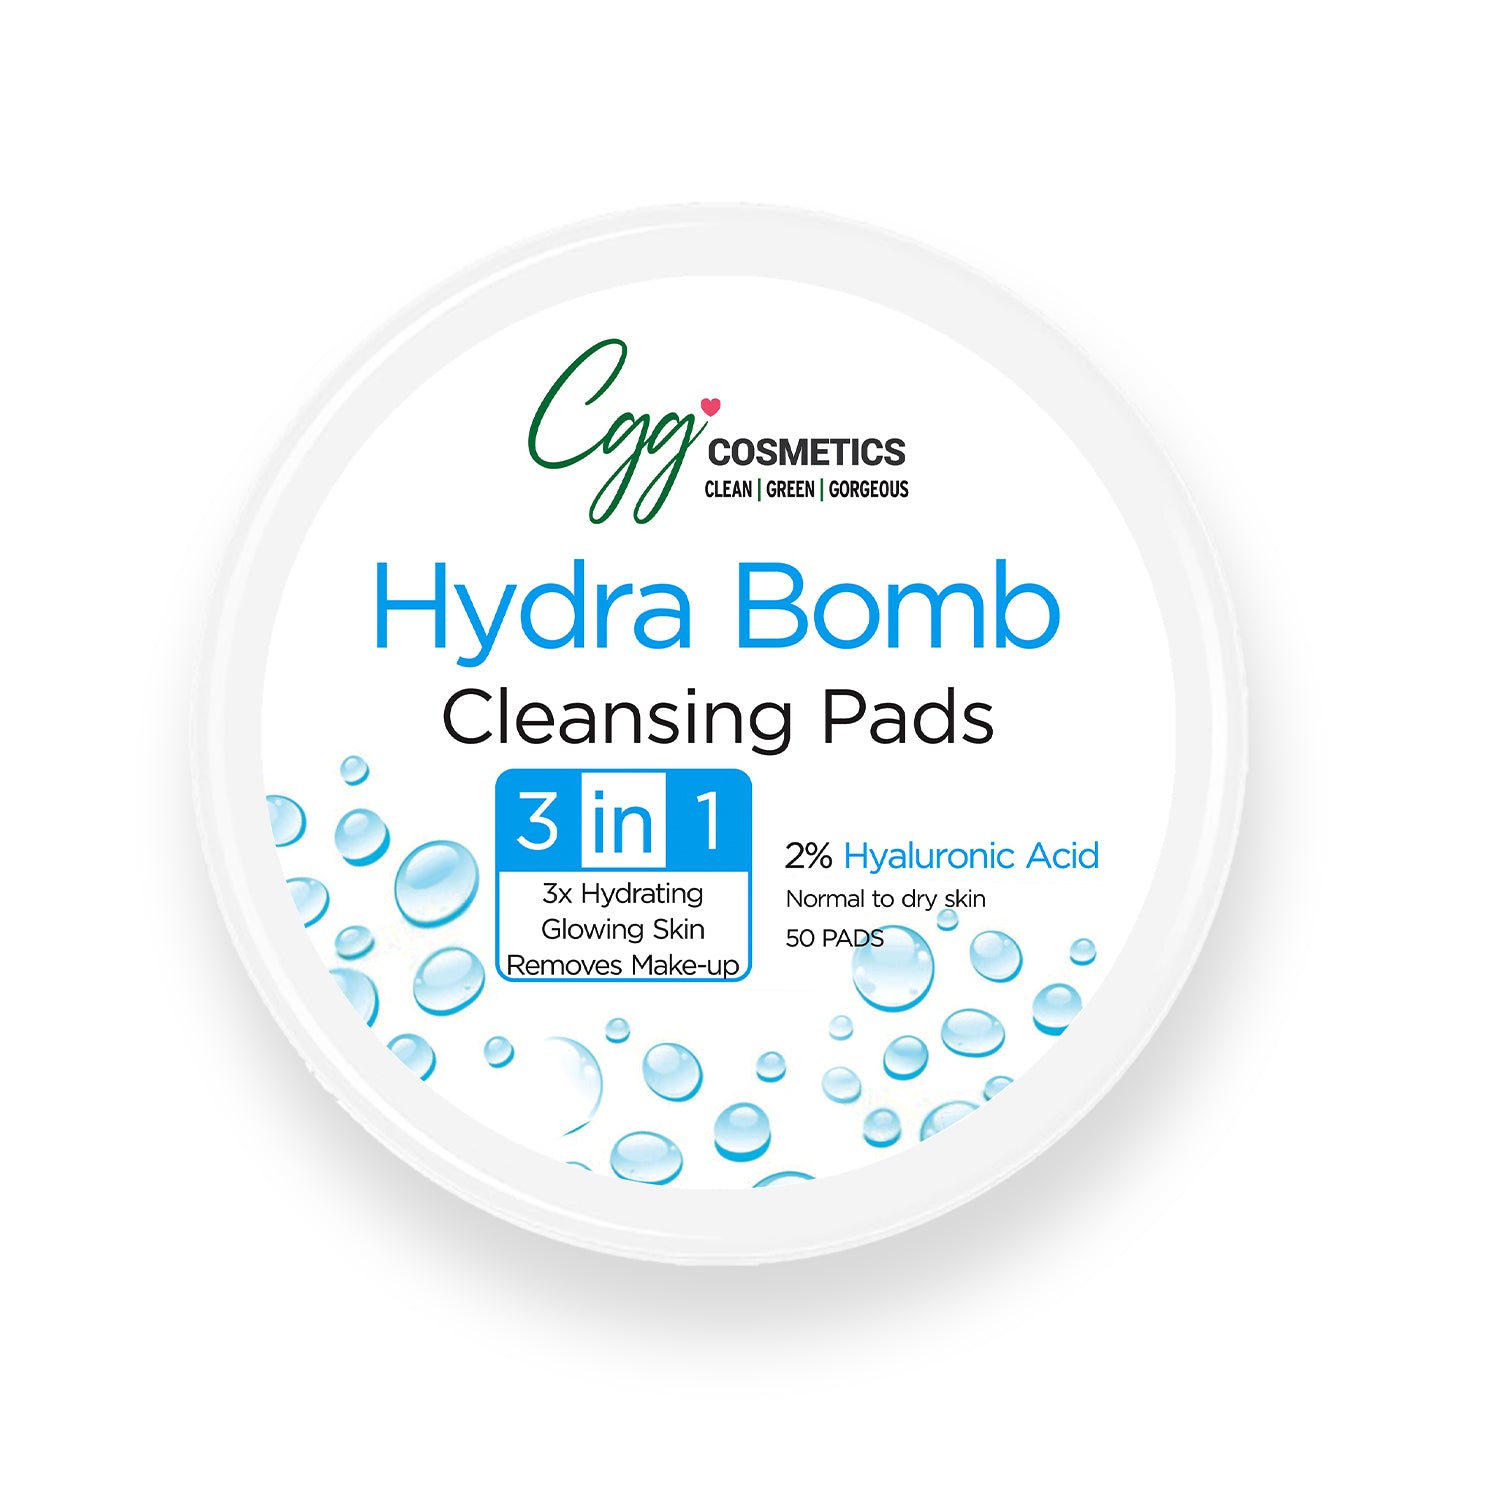 CGG Cosmetics Hydra Bomb Cleansing Pads | 3-in-1 Hydrating, Glowing Skin & Removes Makeup – 50pads